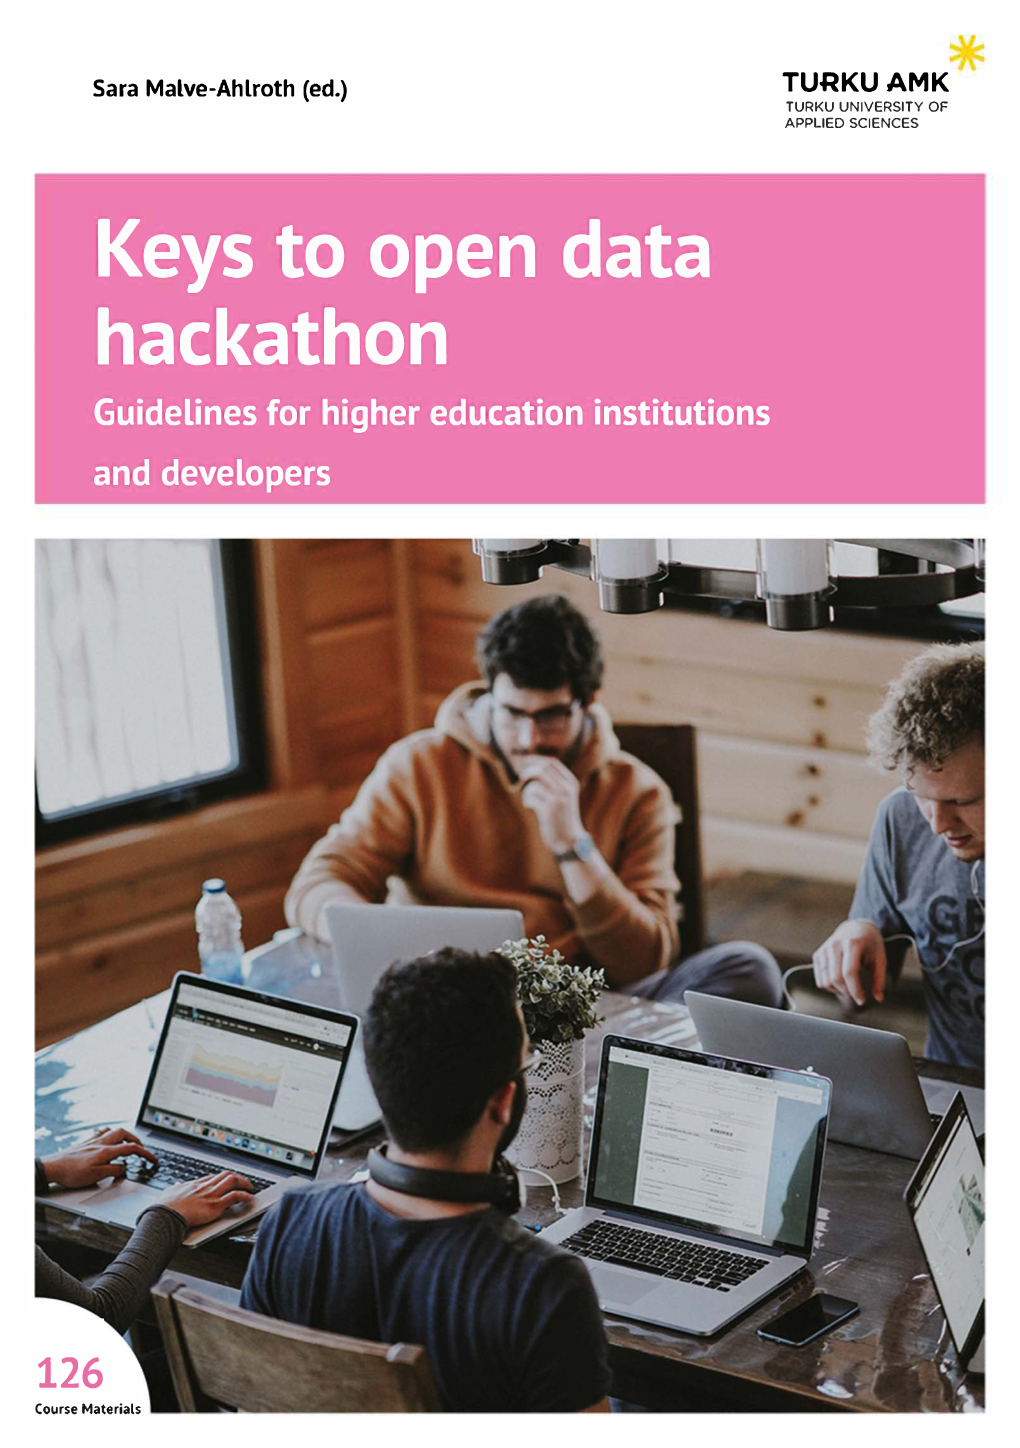 Keys to Open Data Hackathon Guidelines for Higher Education Institutions and Developers